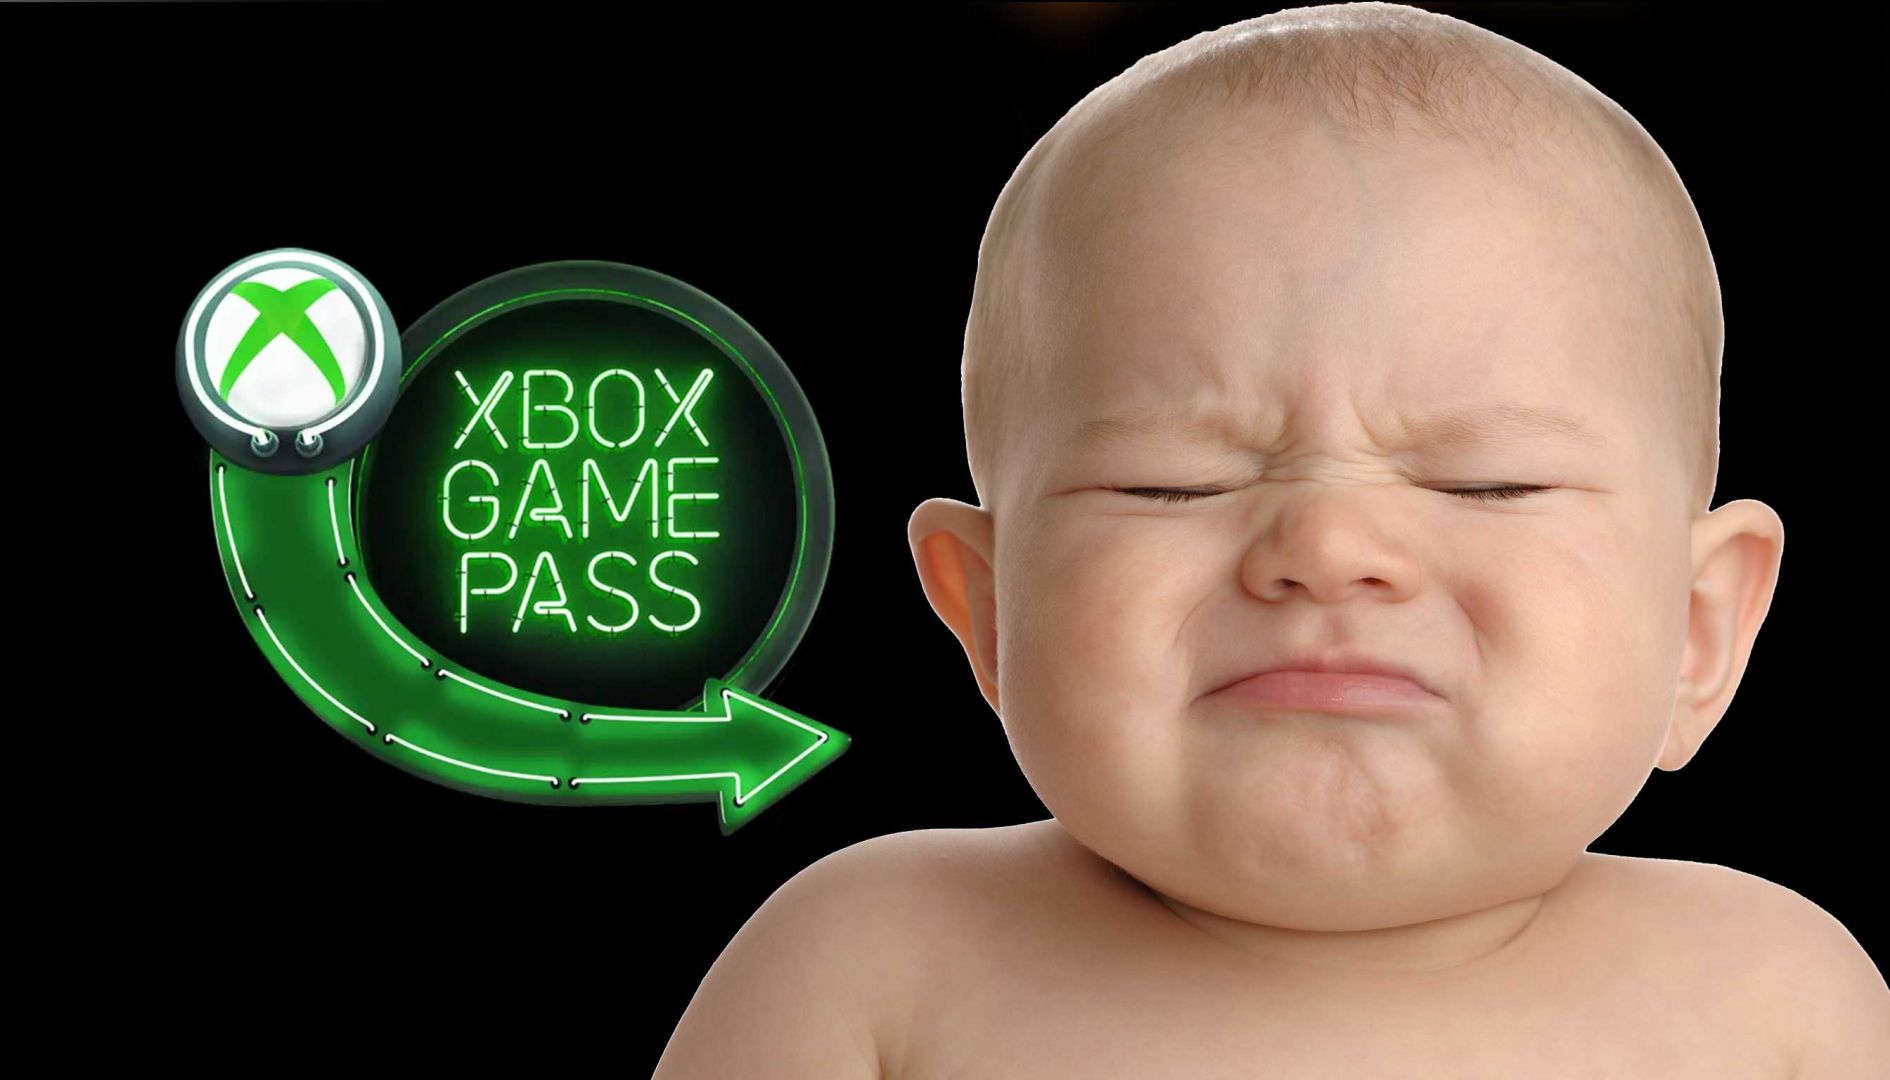 Too bad the 7 new games are leaving Xbox Game Pass